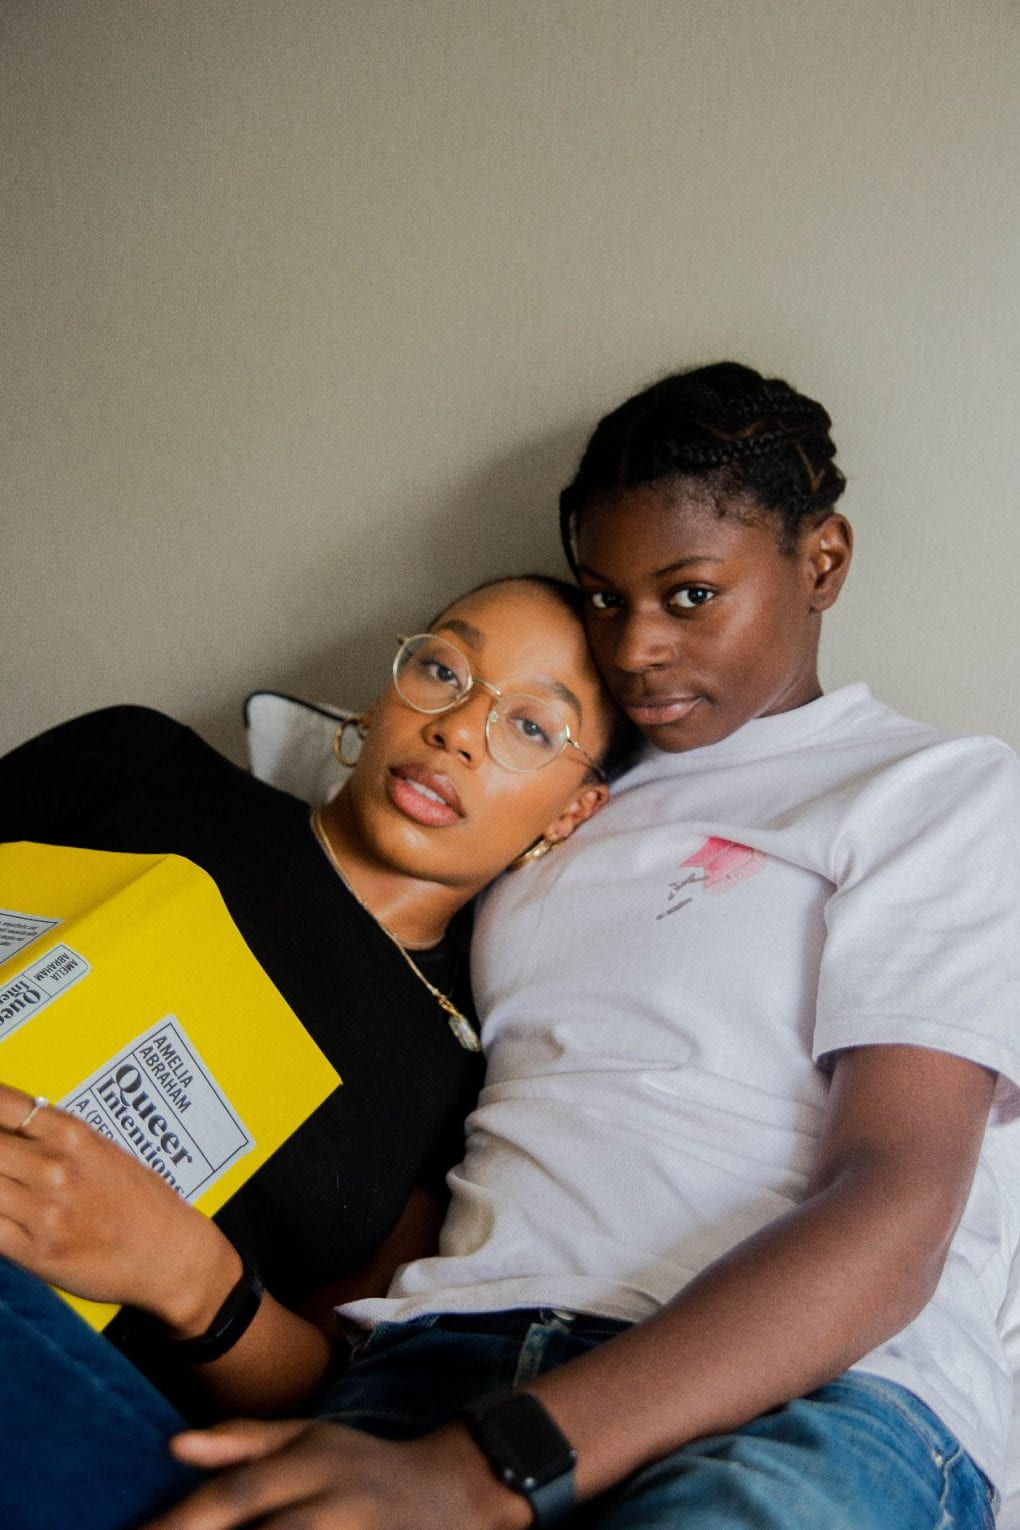 Two women reclining with a book titled Queer Intentions.